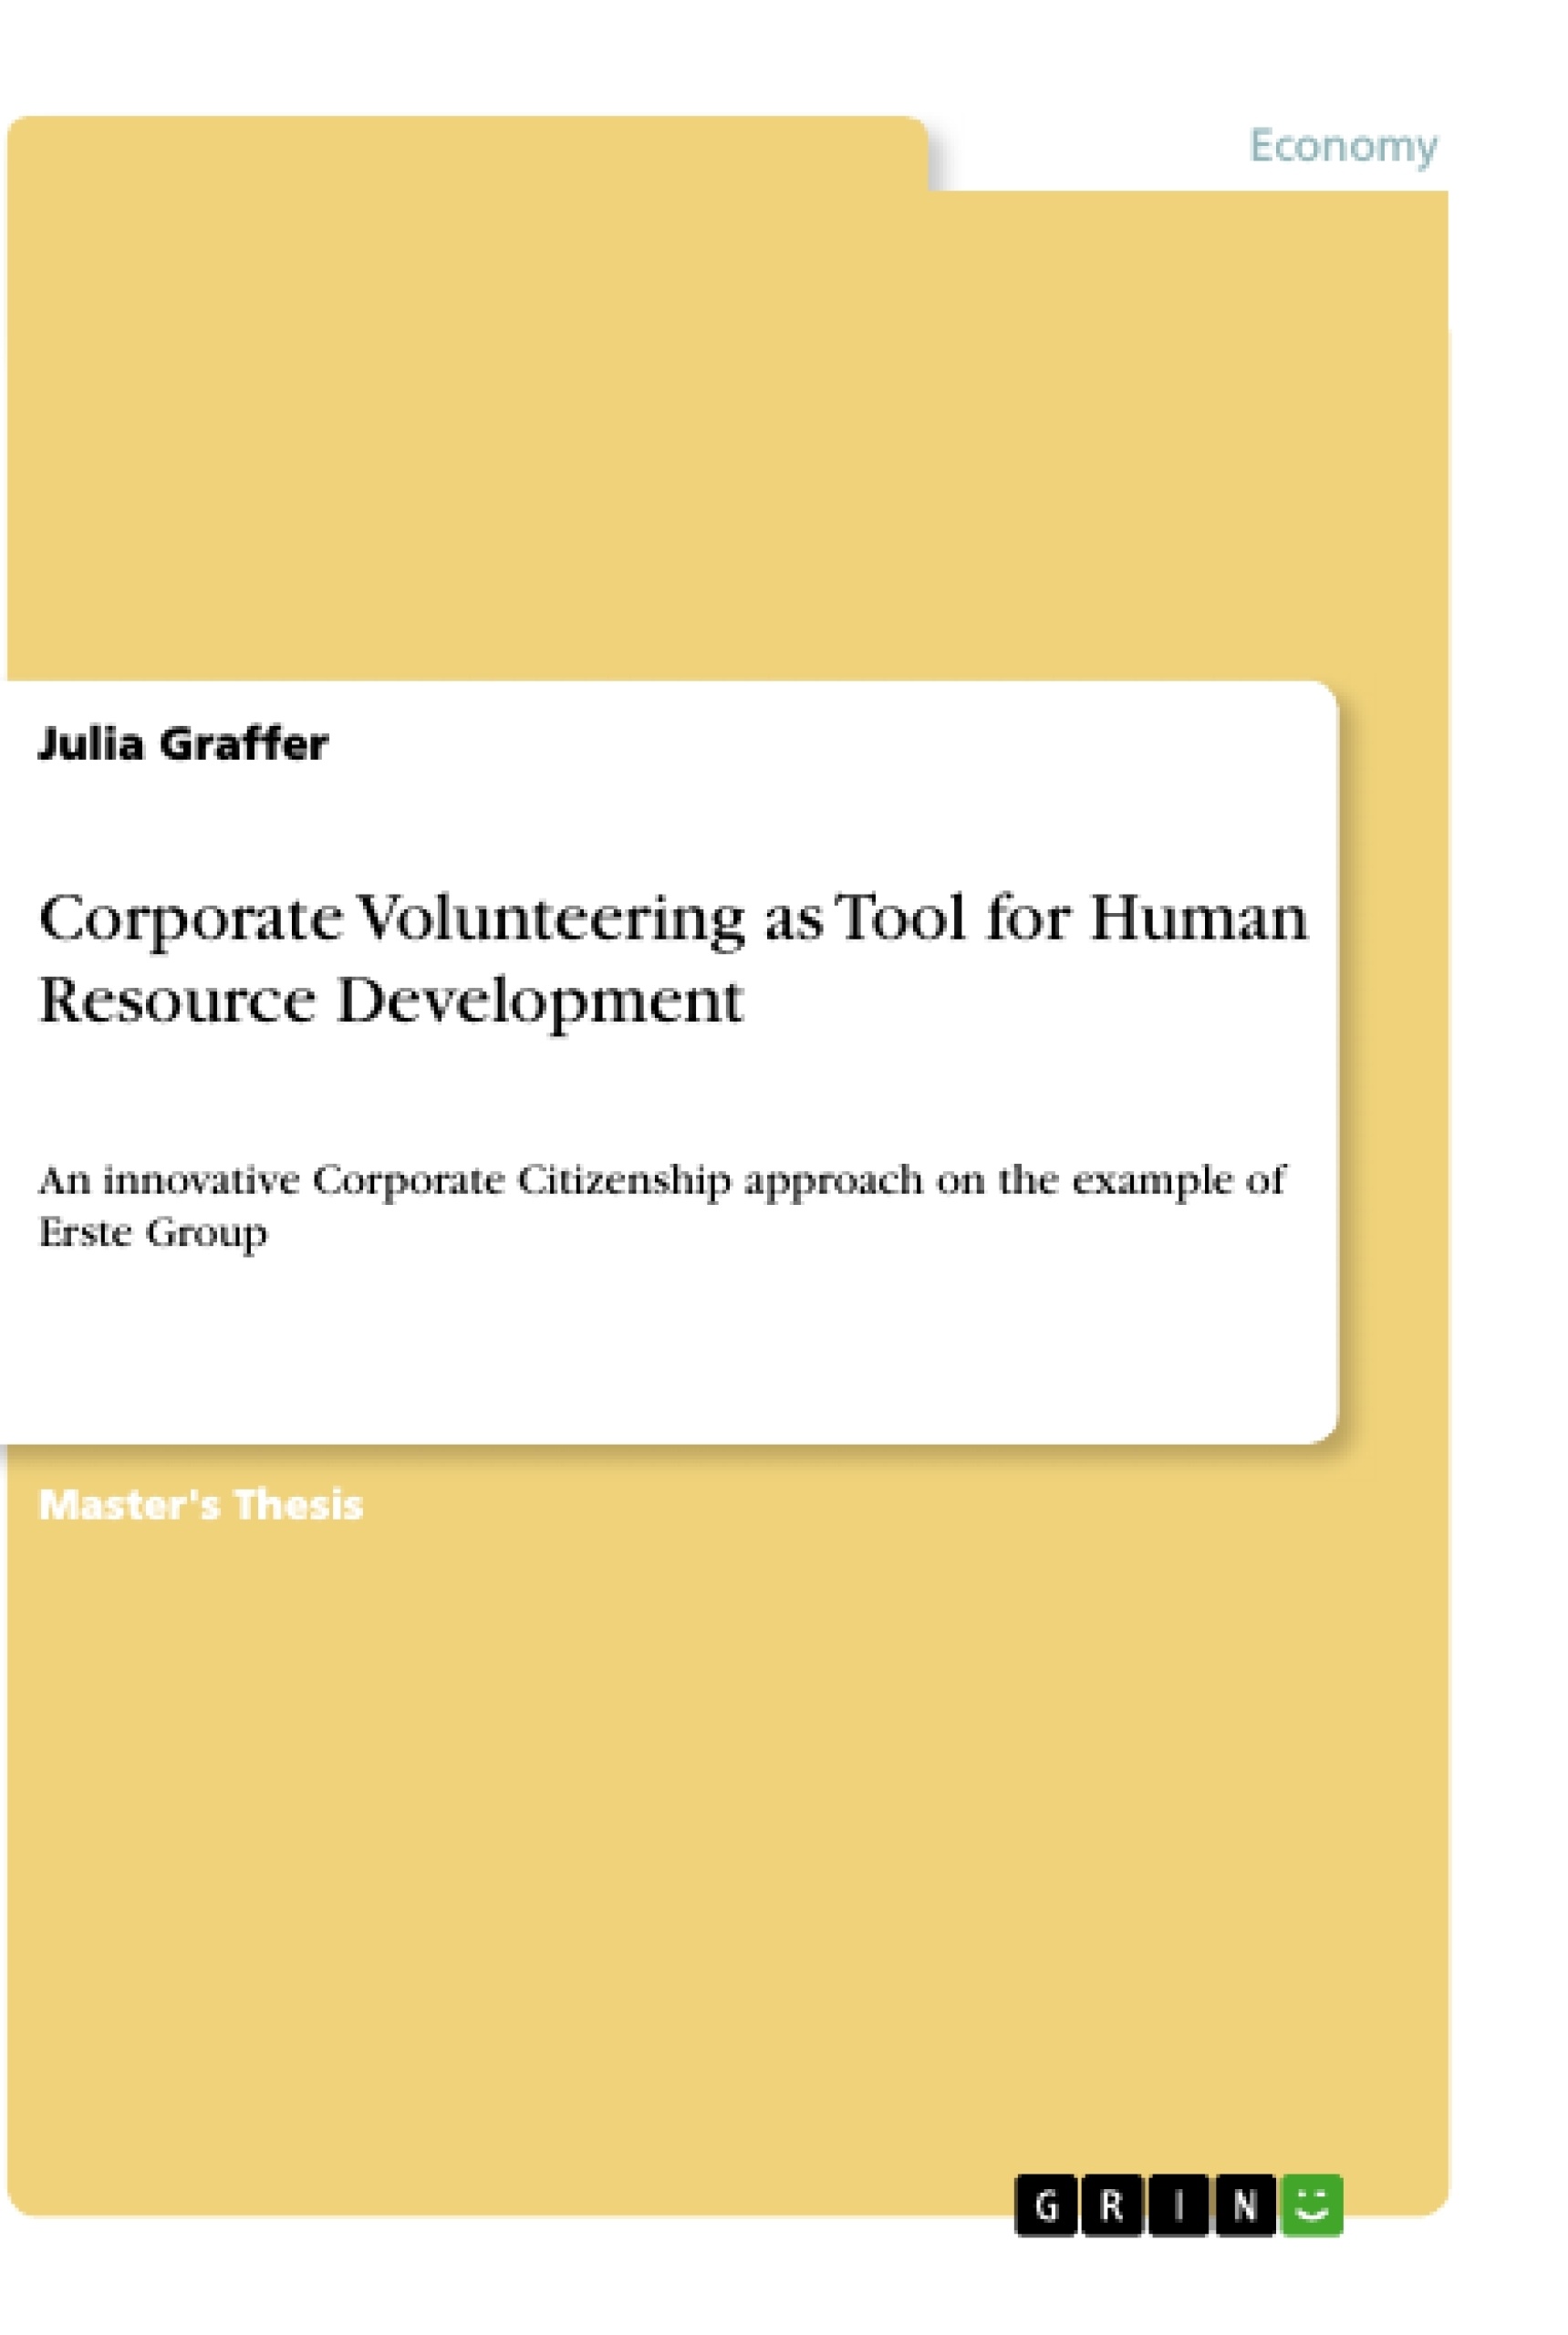 Title: Corporate Volunteering as Tool for Human Resource Development